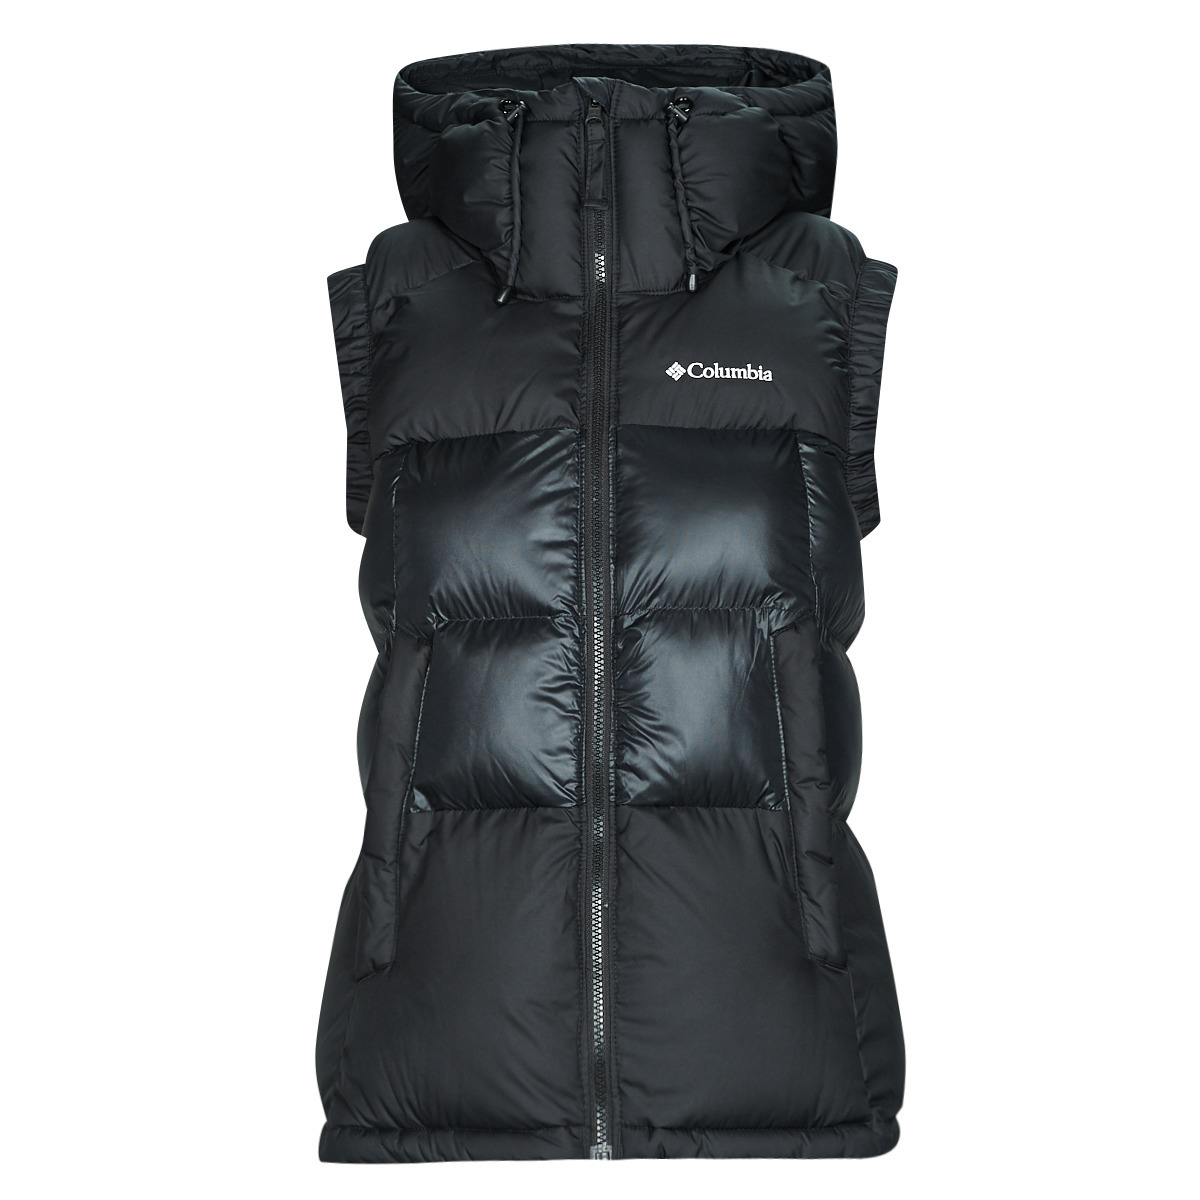 Columbia Black Vest for Woman by Spartoo GOOFASH